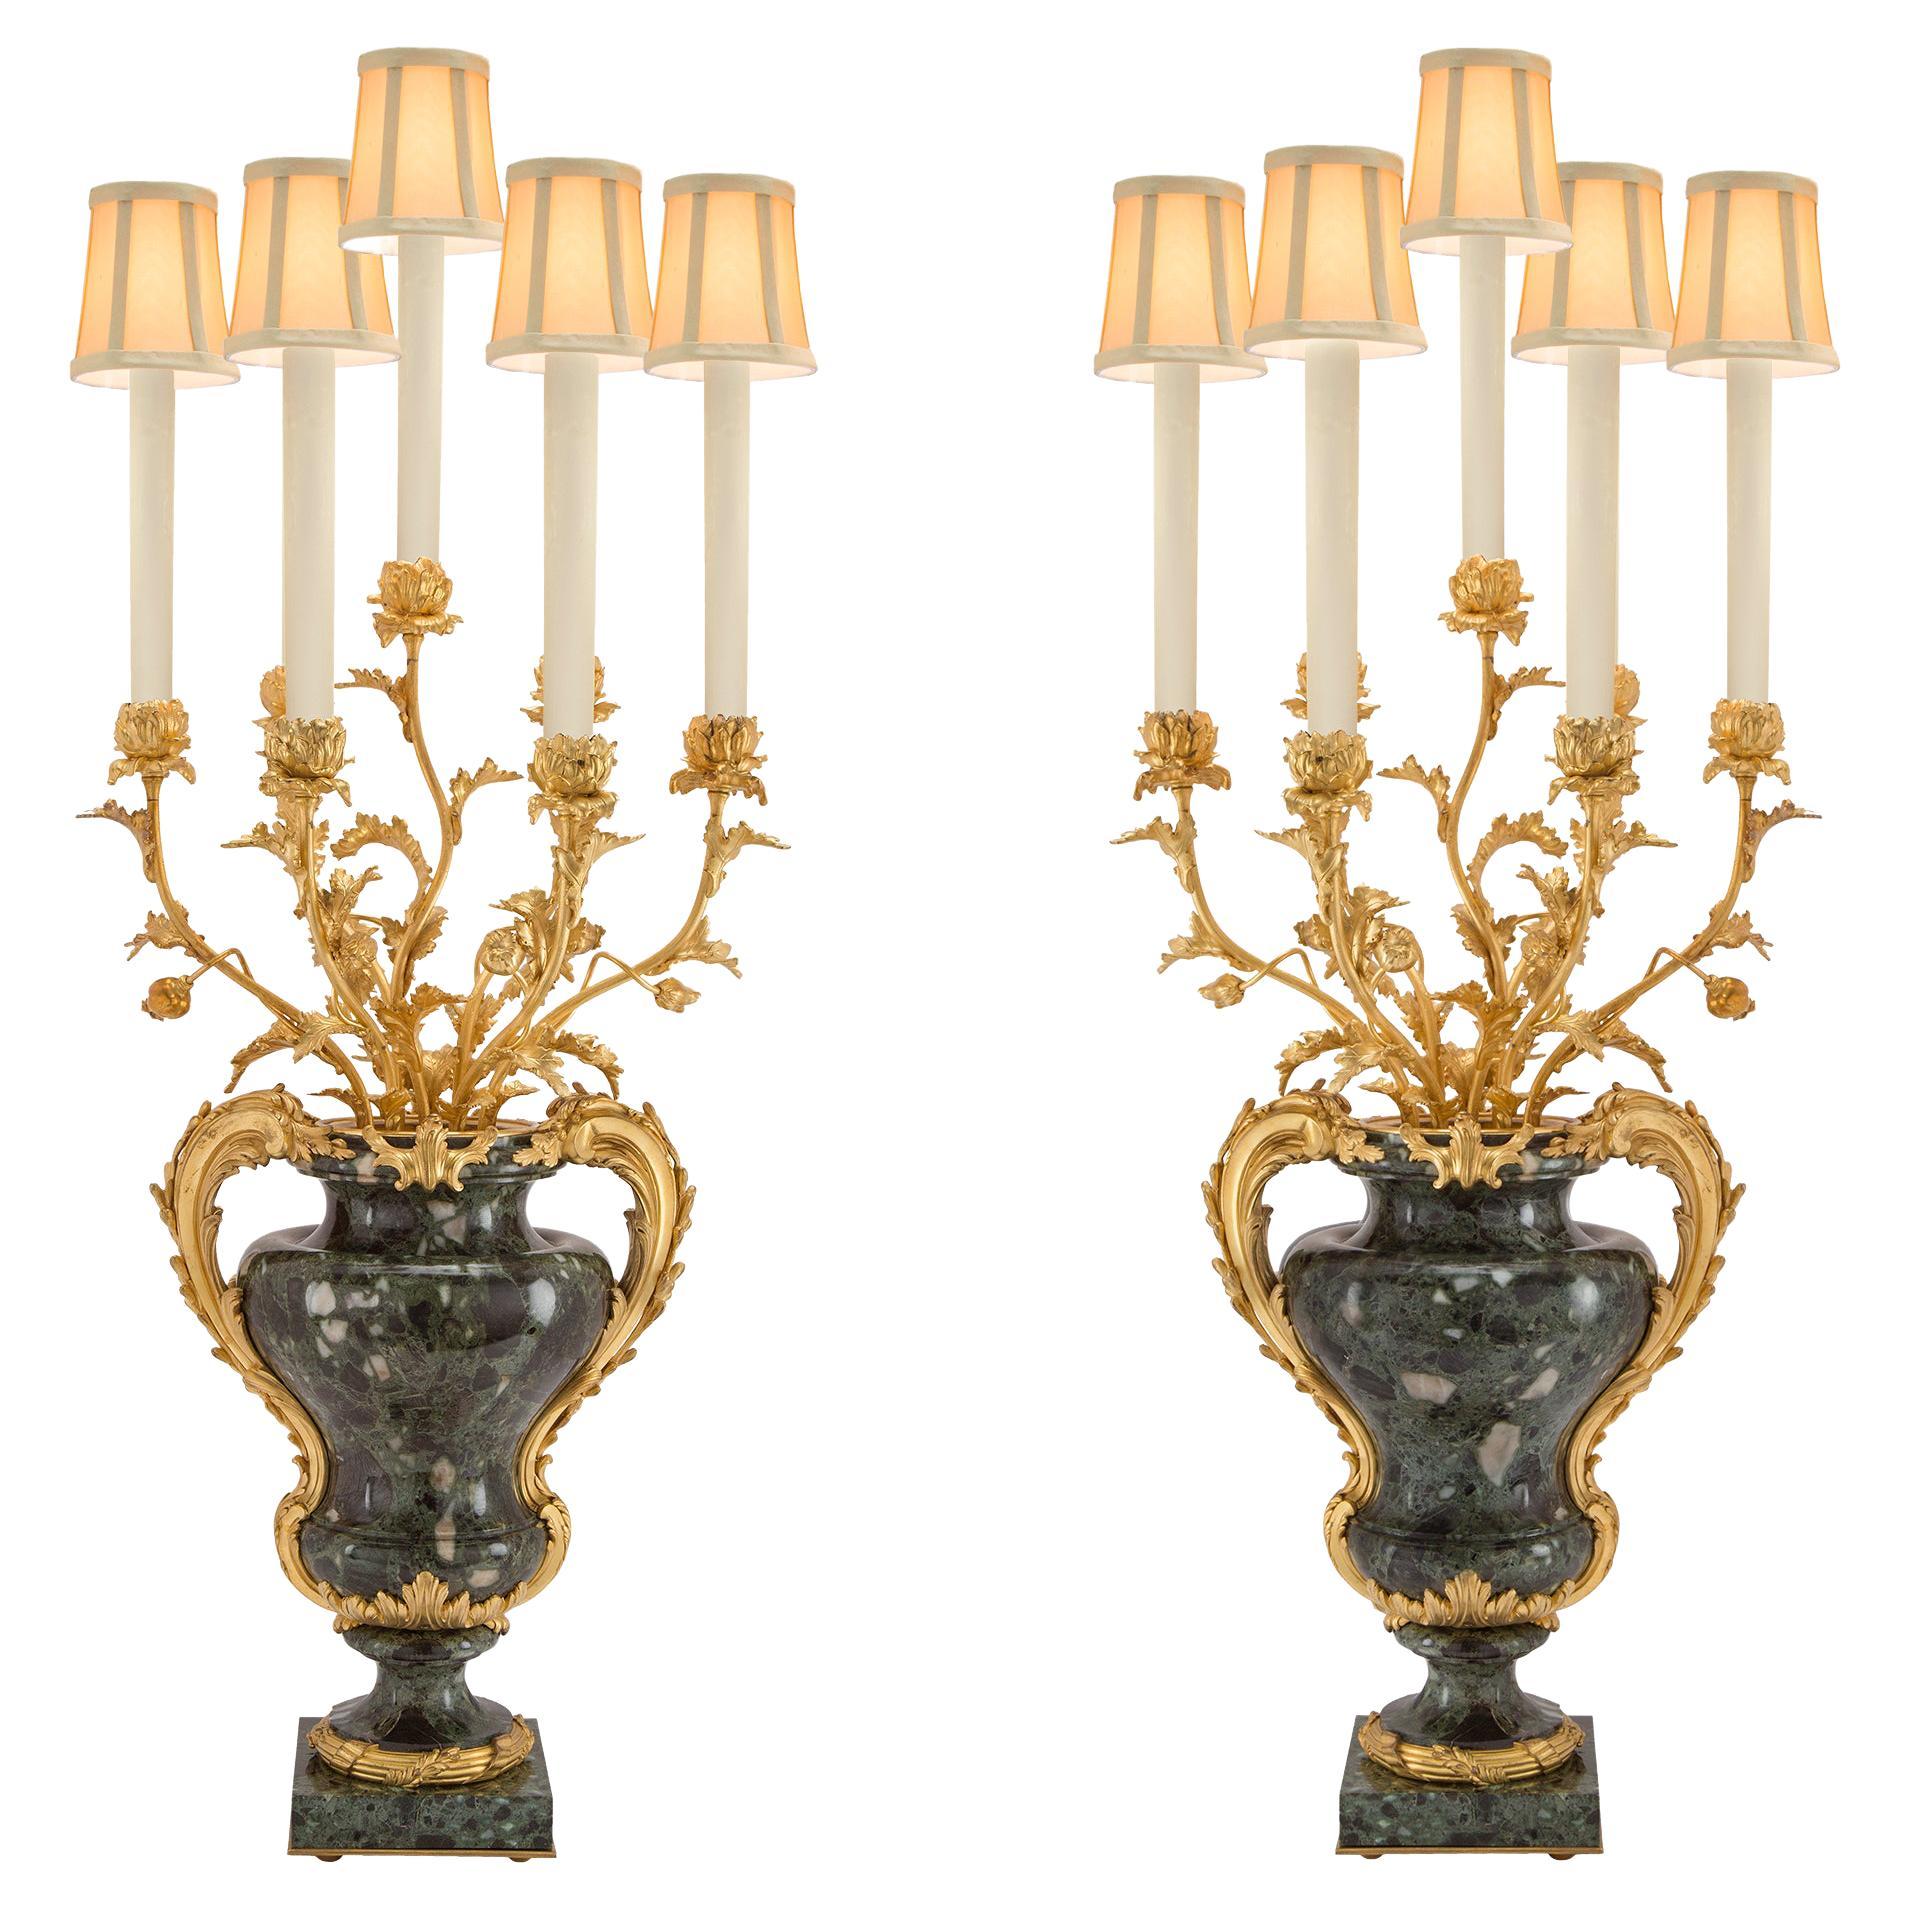 Pair of French Mid-19th Century Louis XVI Style Mounted Candelabras For Sale